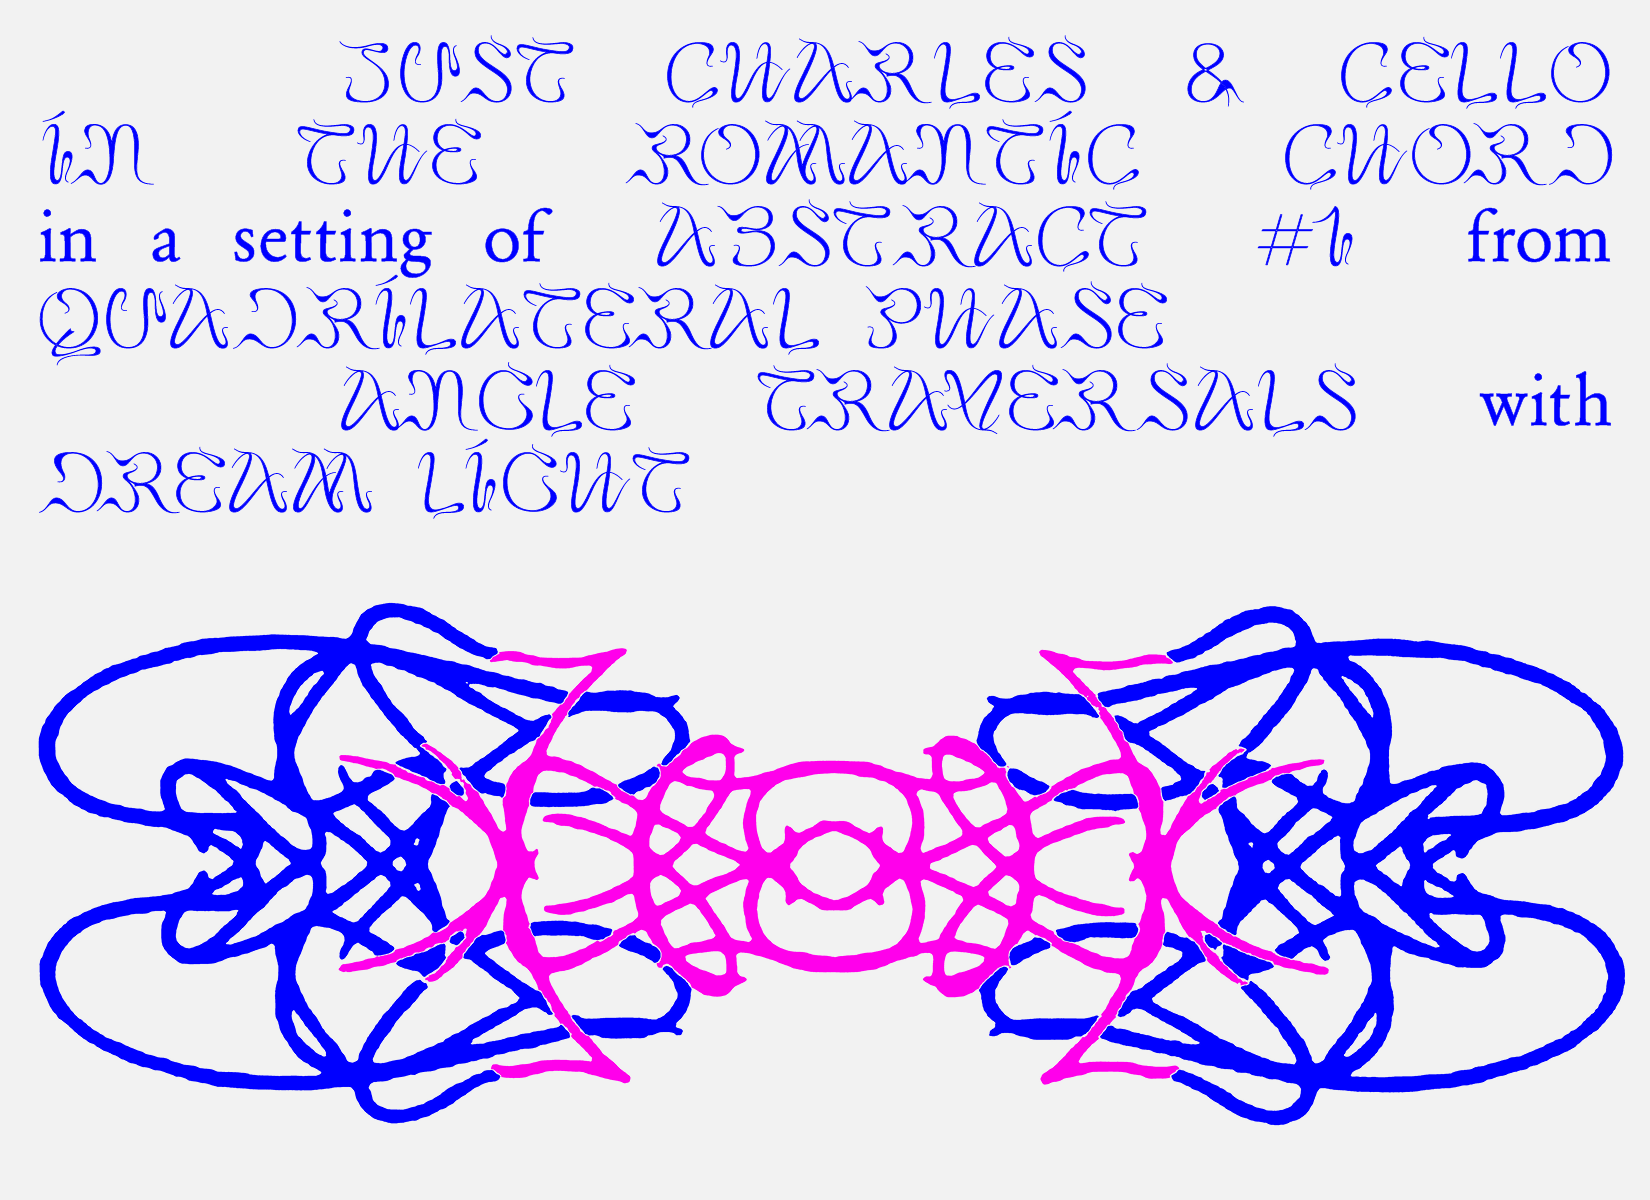 A flyer for an event that reads "Just Charles & Cello in the Romantic Chord in a setting of Abstract #1 from Quadrilateral Phase Angle Traversals in Dream Light" with an abstract calligraphic graphic